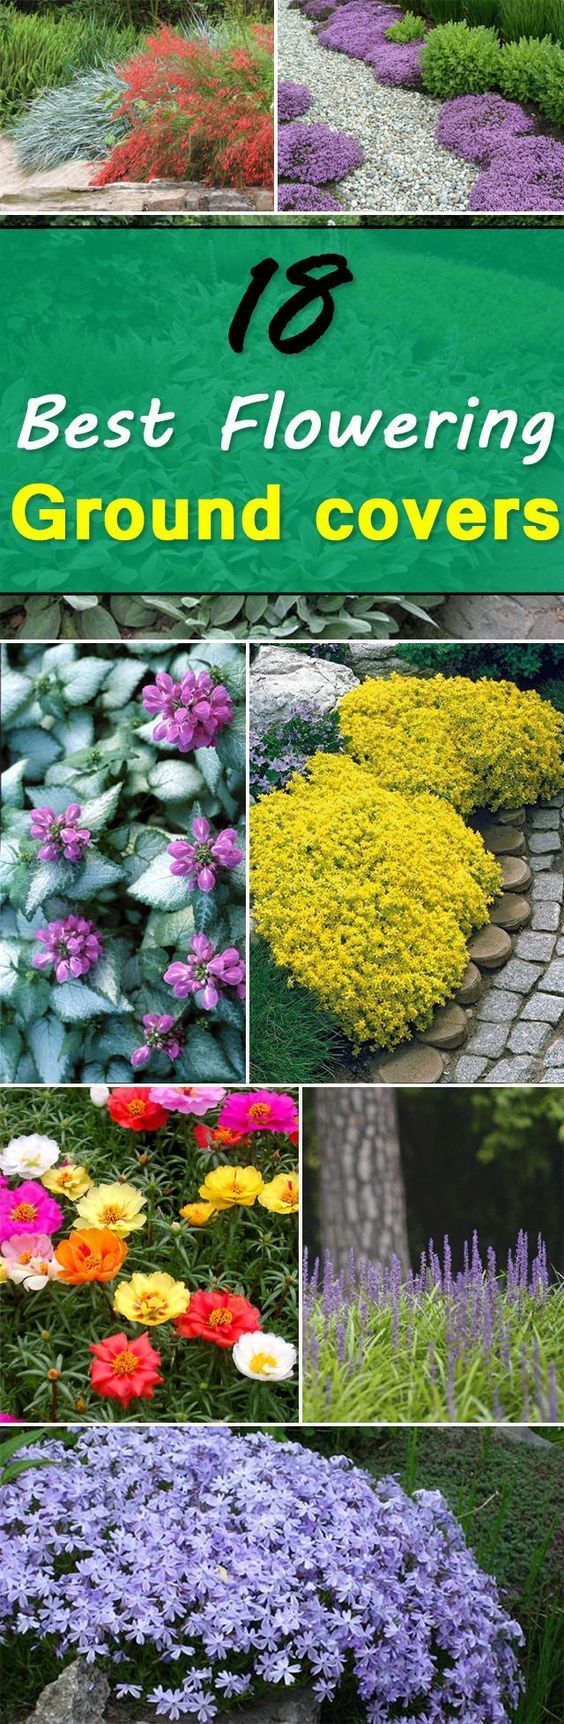 Check out these 18 Flowering Ground Cover Plants – they’re not only easy to grow but look beautiful too! | Balcony Garden Web